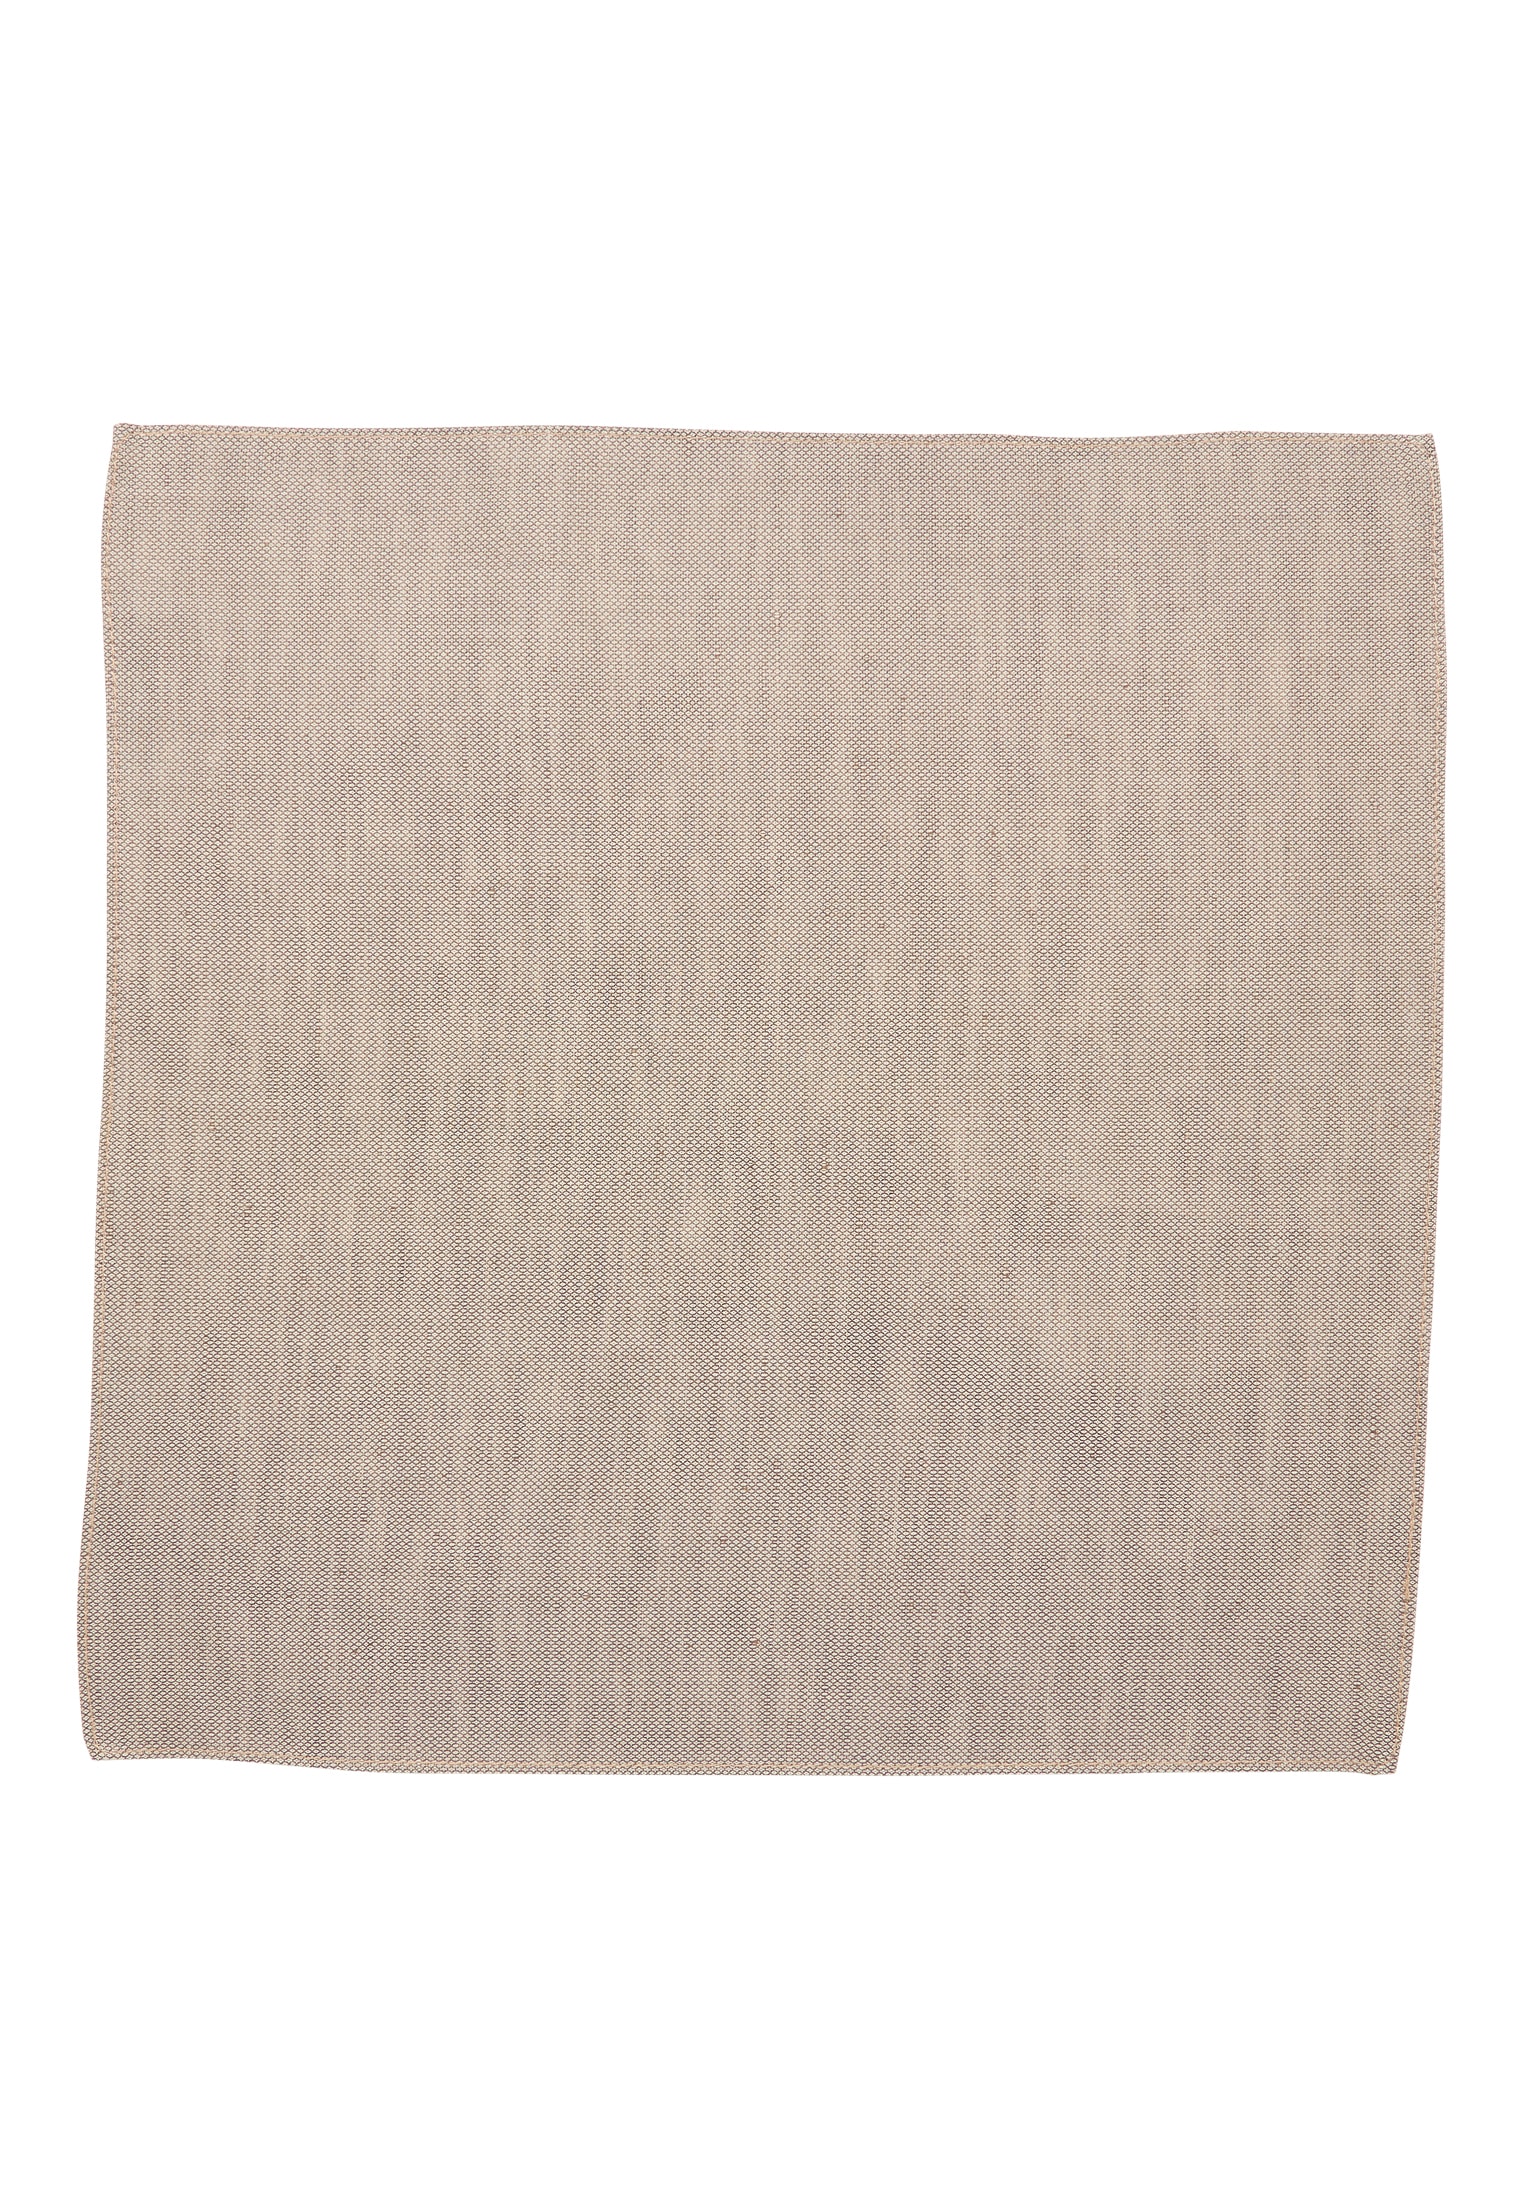 Pocket square in taupe structured